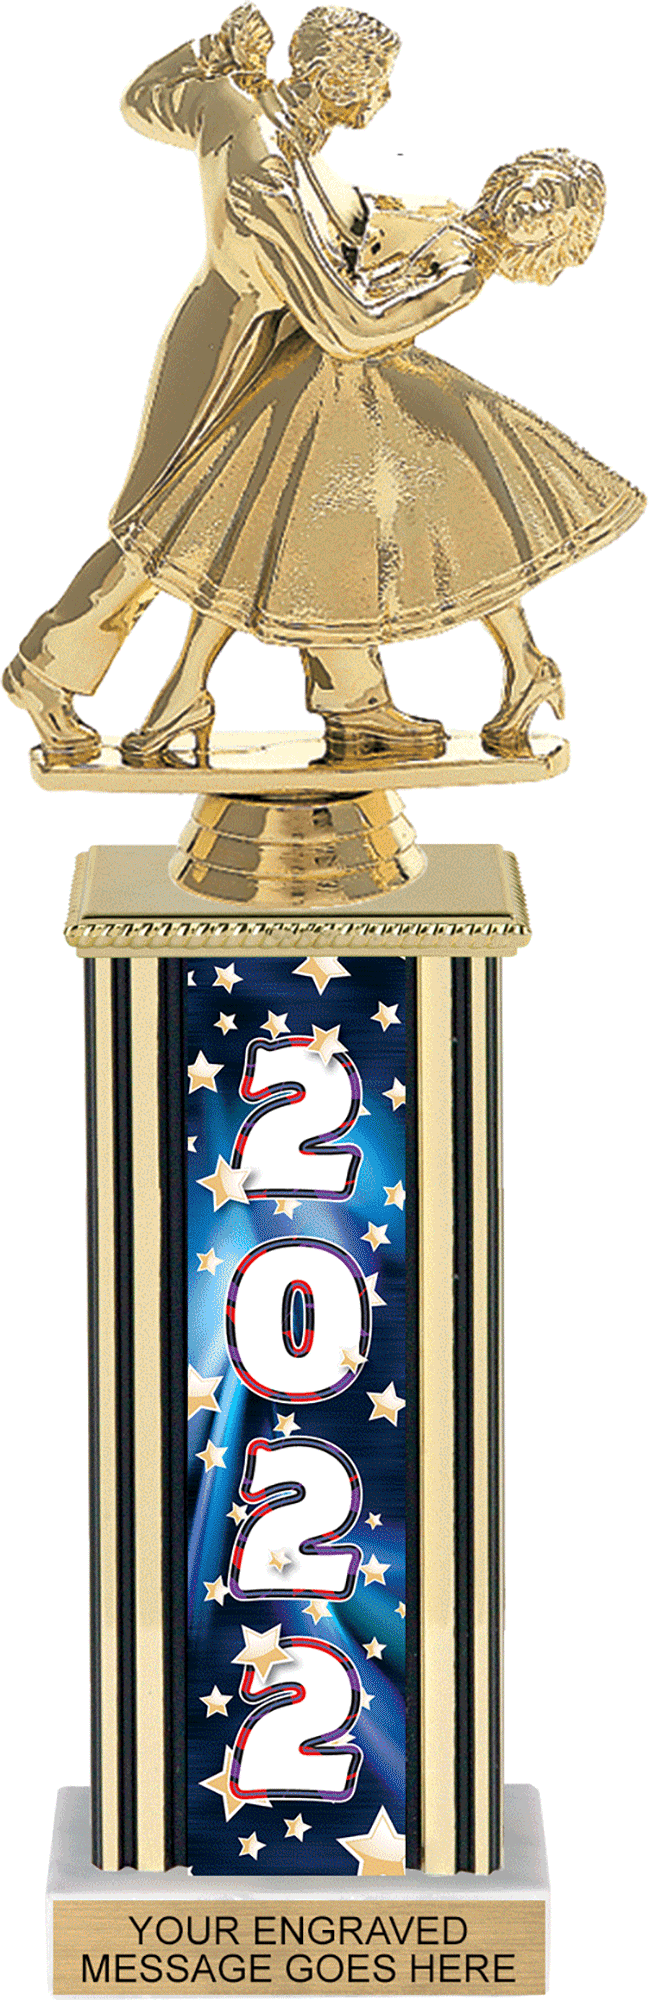 Year Glowing Stars Rectangle Column Trophy - Blue 12 inch